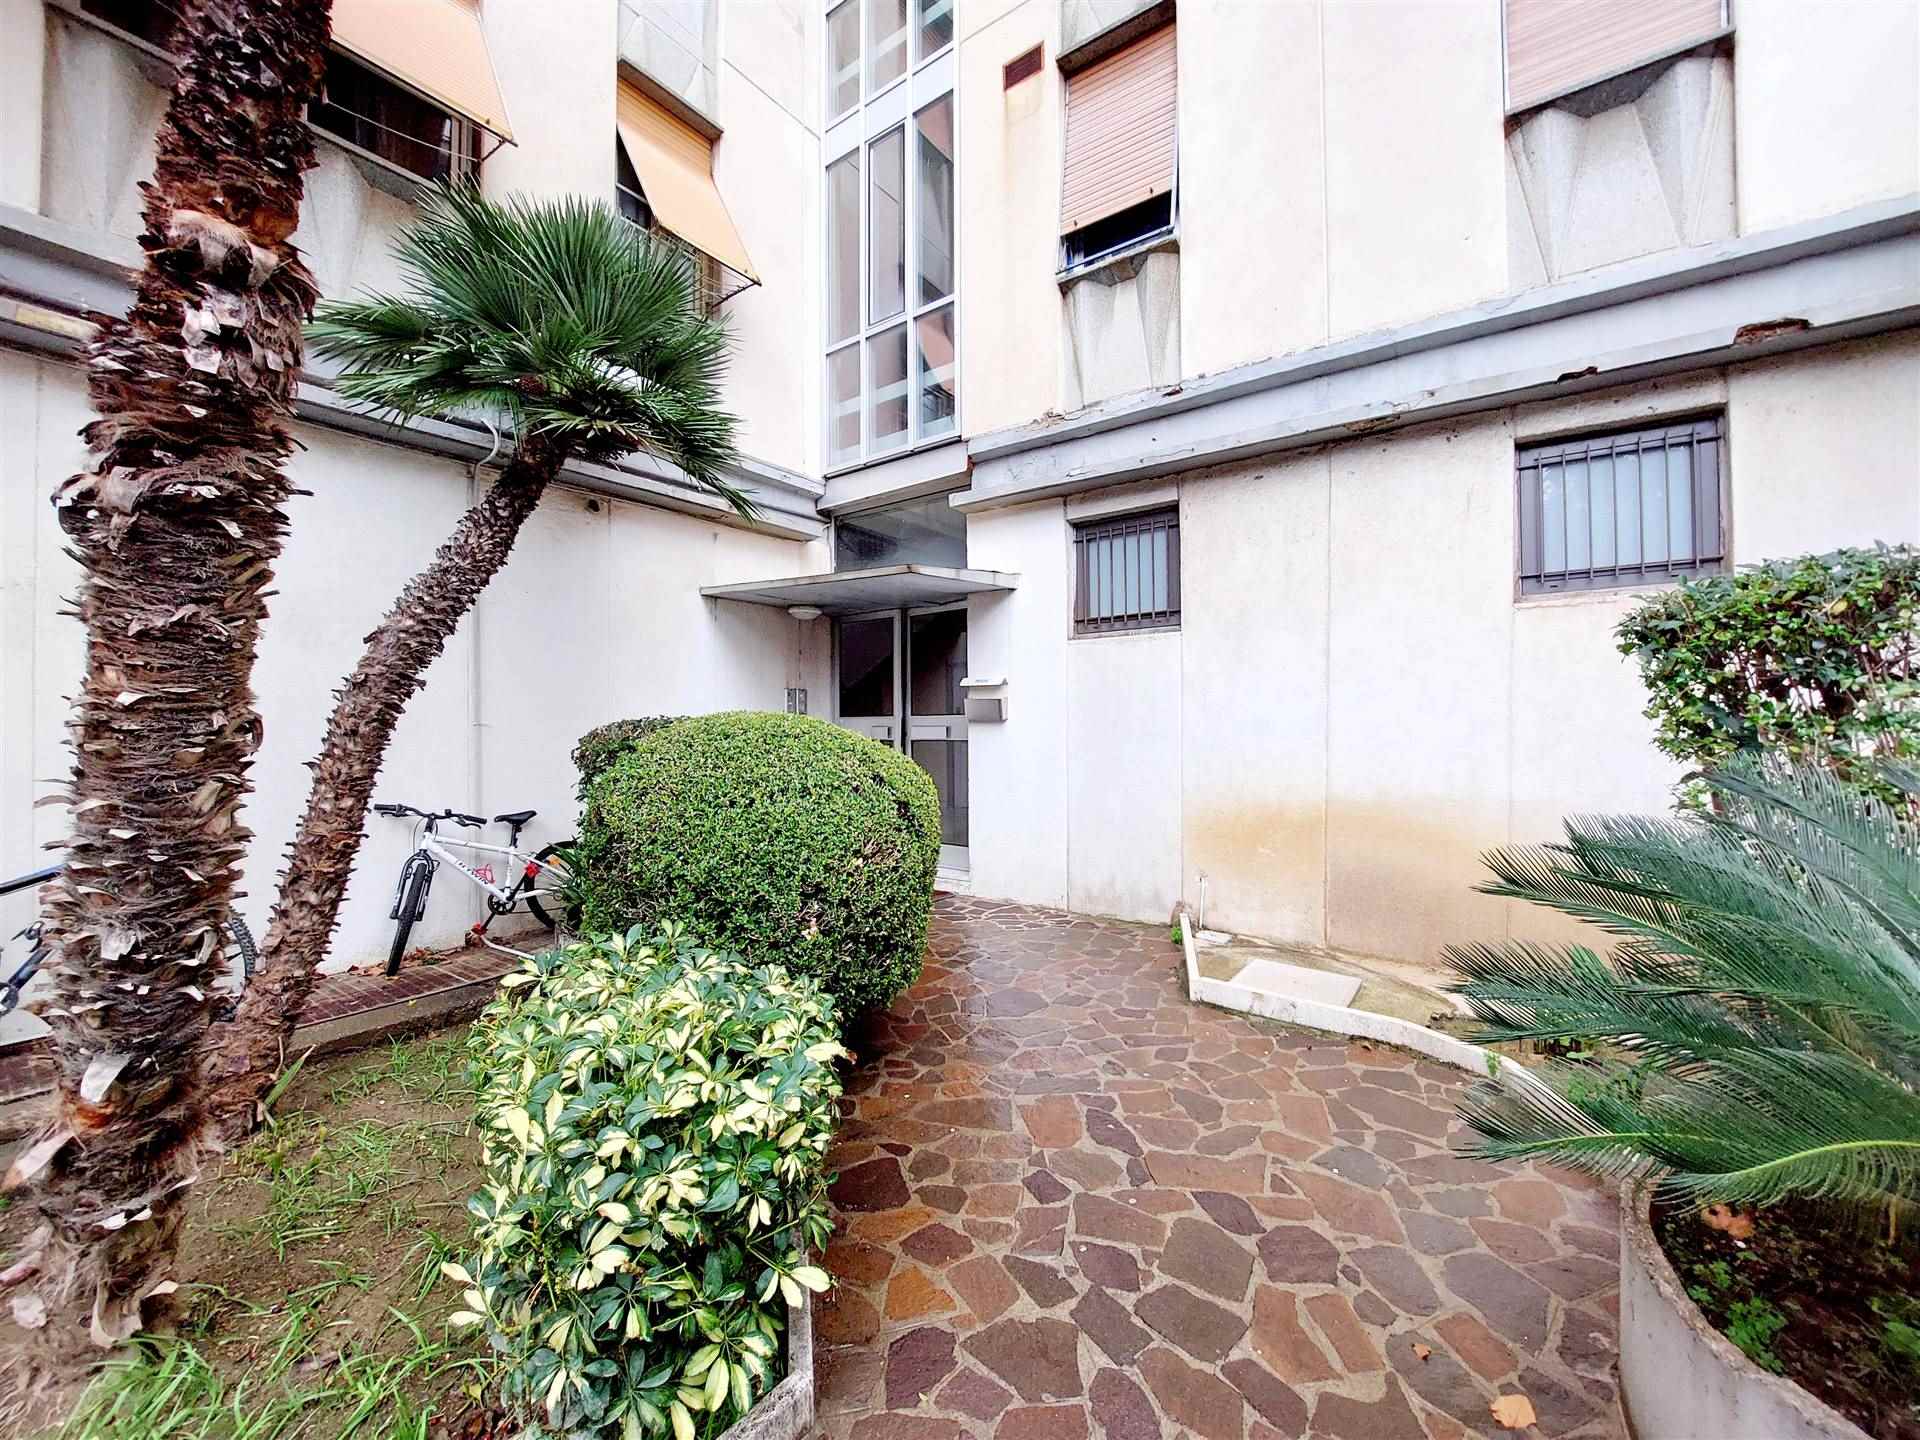 CENTRO, CIVITAVECCHIA, Apartment for sale of 90 Sq. mt., Habitable, Heating Centralized, Energetic class: G, Epi: 175 kwh/m2 year, placed at 3°, composed by: 4 Rooms, Separate kitchen, , 2 Bedrooms, 